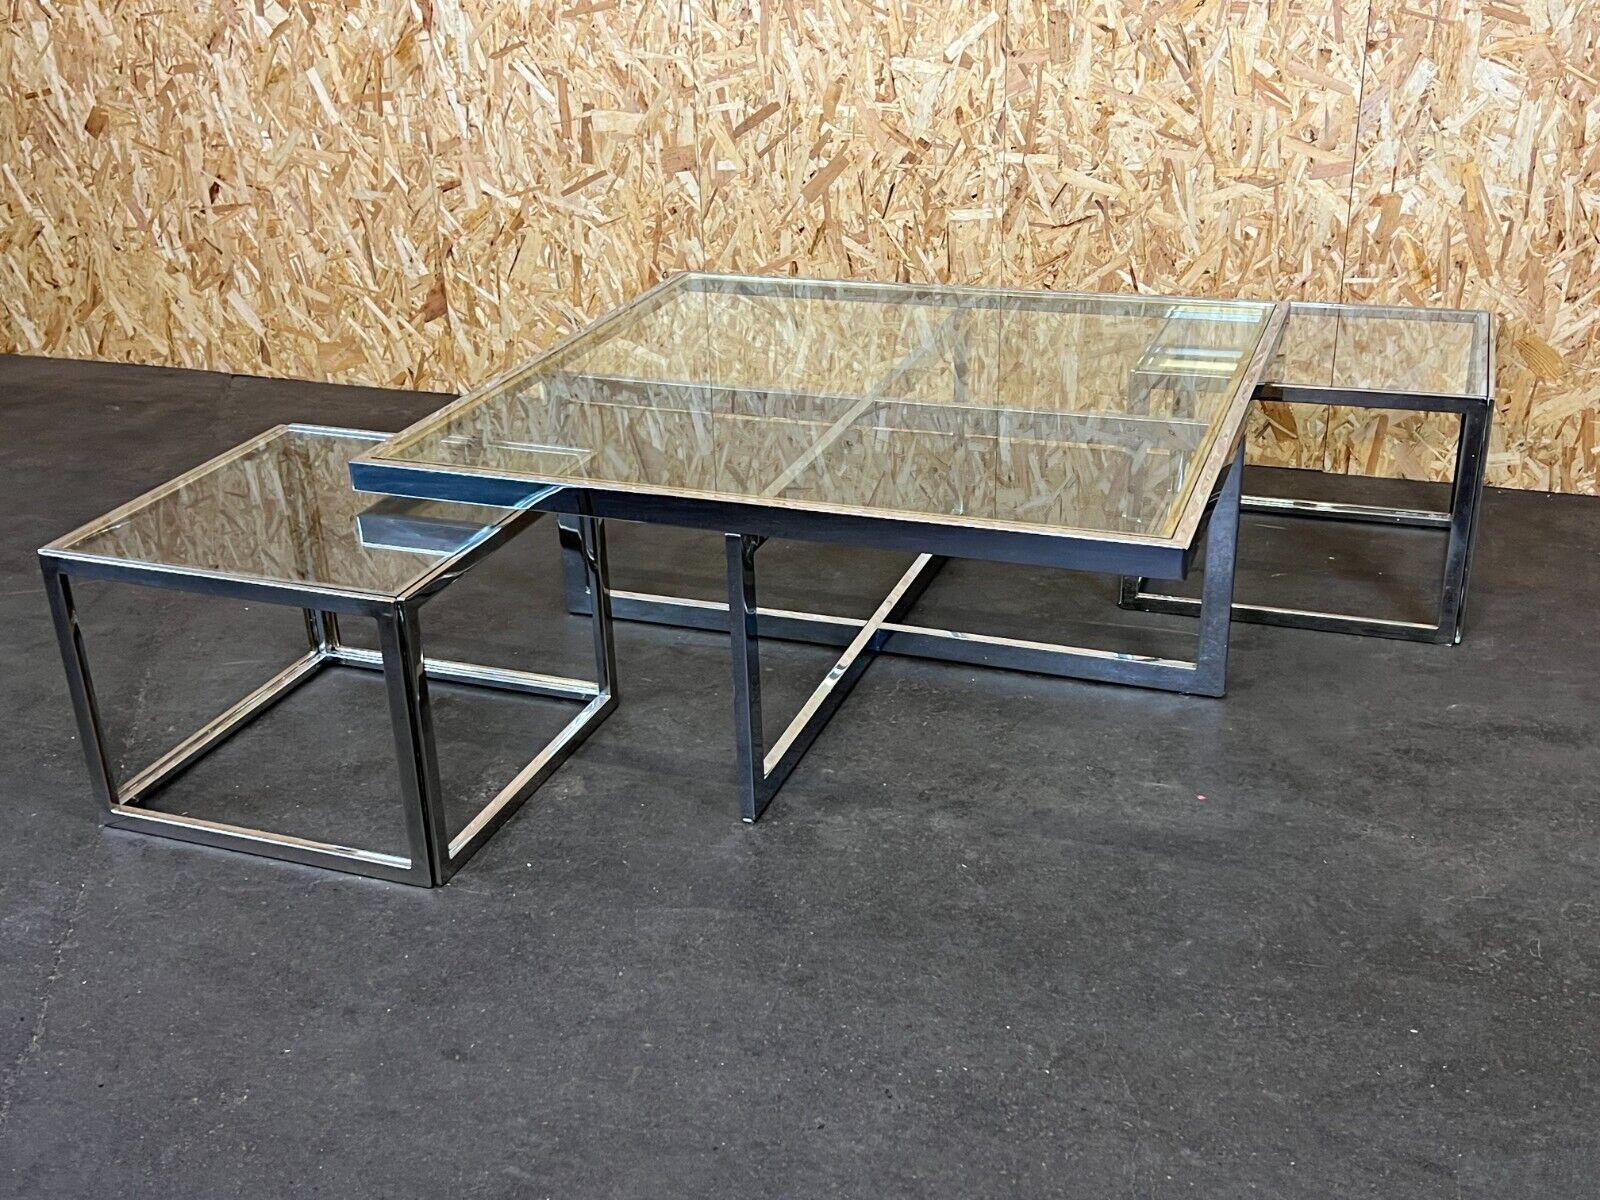 60s 70s Jean Charles Maison Huge coffee table Chrome & brass 2 nesting tables

Object: coffee table

Manufacturer: Maison Charles

Condition: good - vintage

Age: around 1960-1970

Dimensions:

Width = 104cm
Depth = 104cm
Height =